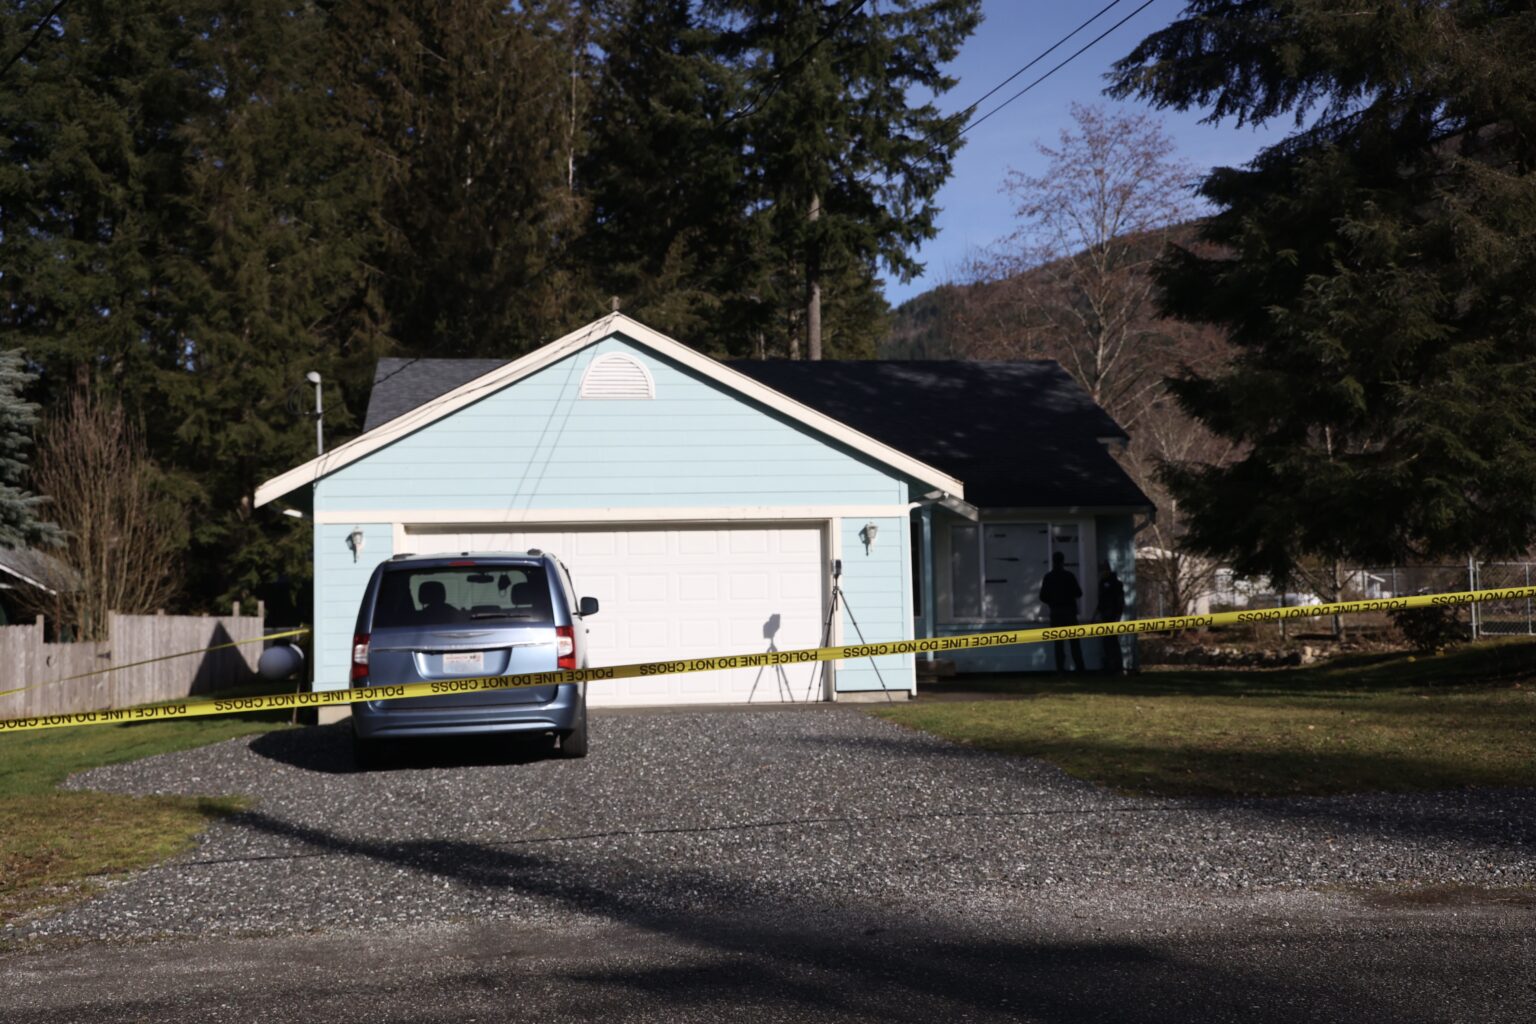 The home of shooting suspect Joel B. Young on Green Valley Drive in Maple Falls could be an asset used to compensate the deputies for damages.